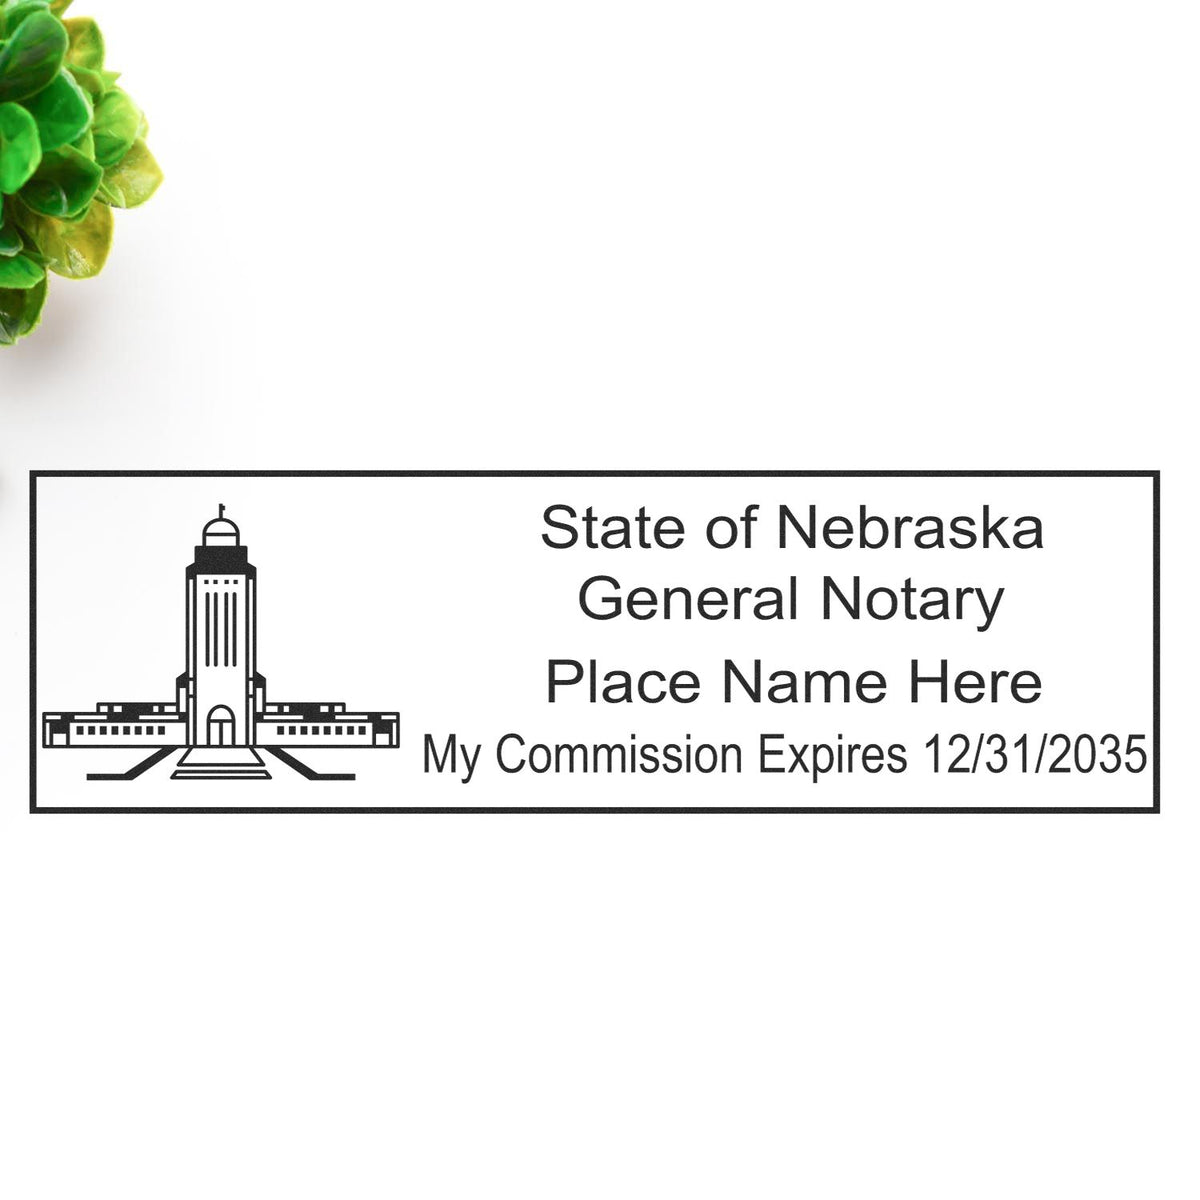 The Super Slim Nebraska Notary Public Stamp stamp impression comes to life with a crisp, detailed photo on paper - showcasing true professional quality.